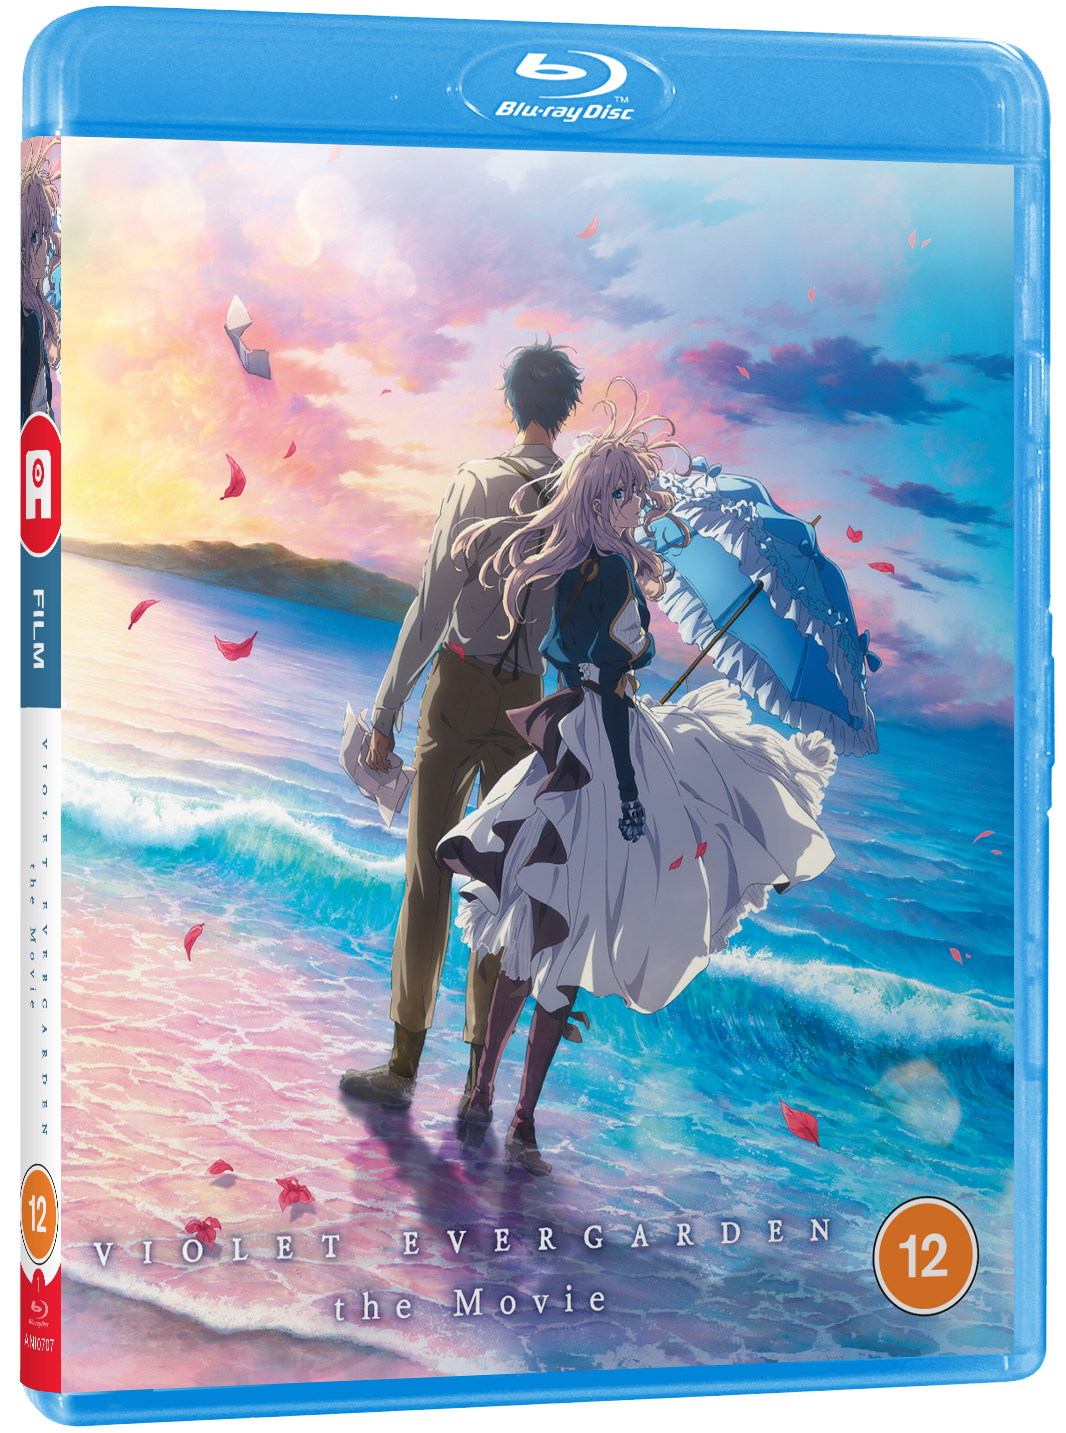 myReviewer.com - Review for Violet Evergarden - Collector's Edition